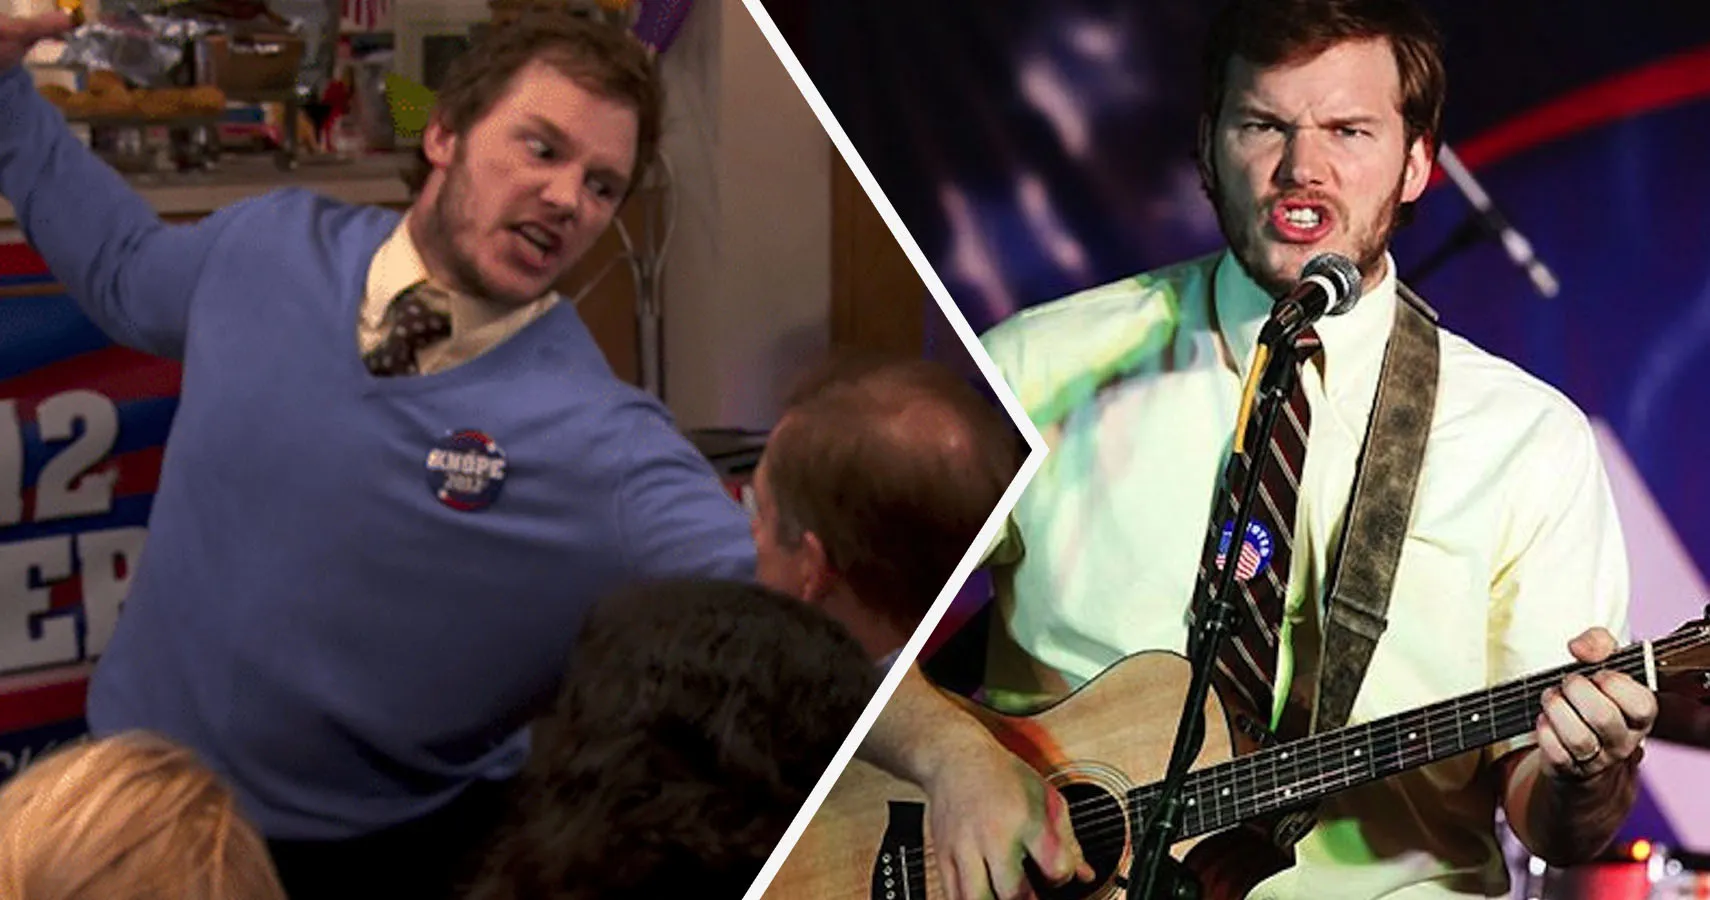 Which Chris Pratt film is about a group of misfits who must save the galaxy from a powerful villain?